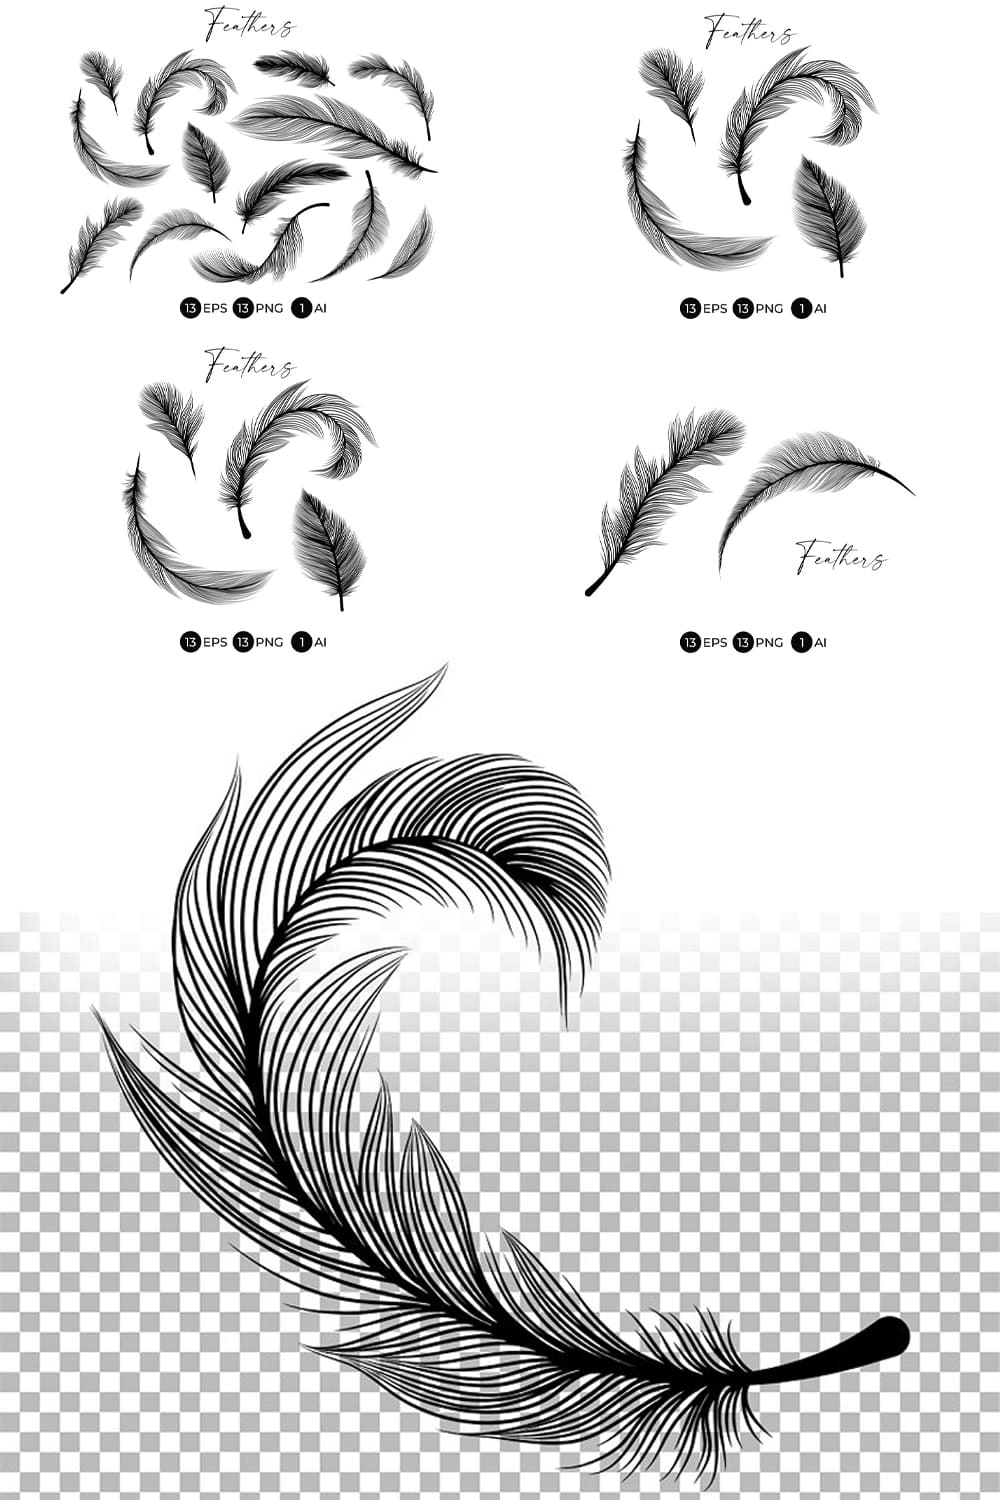 Black and White Feathers Stencil, Vector Modern Png Clipart, Boho Line Art  Design Elements. Feather Sublimation Digital Download. 